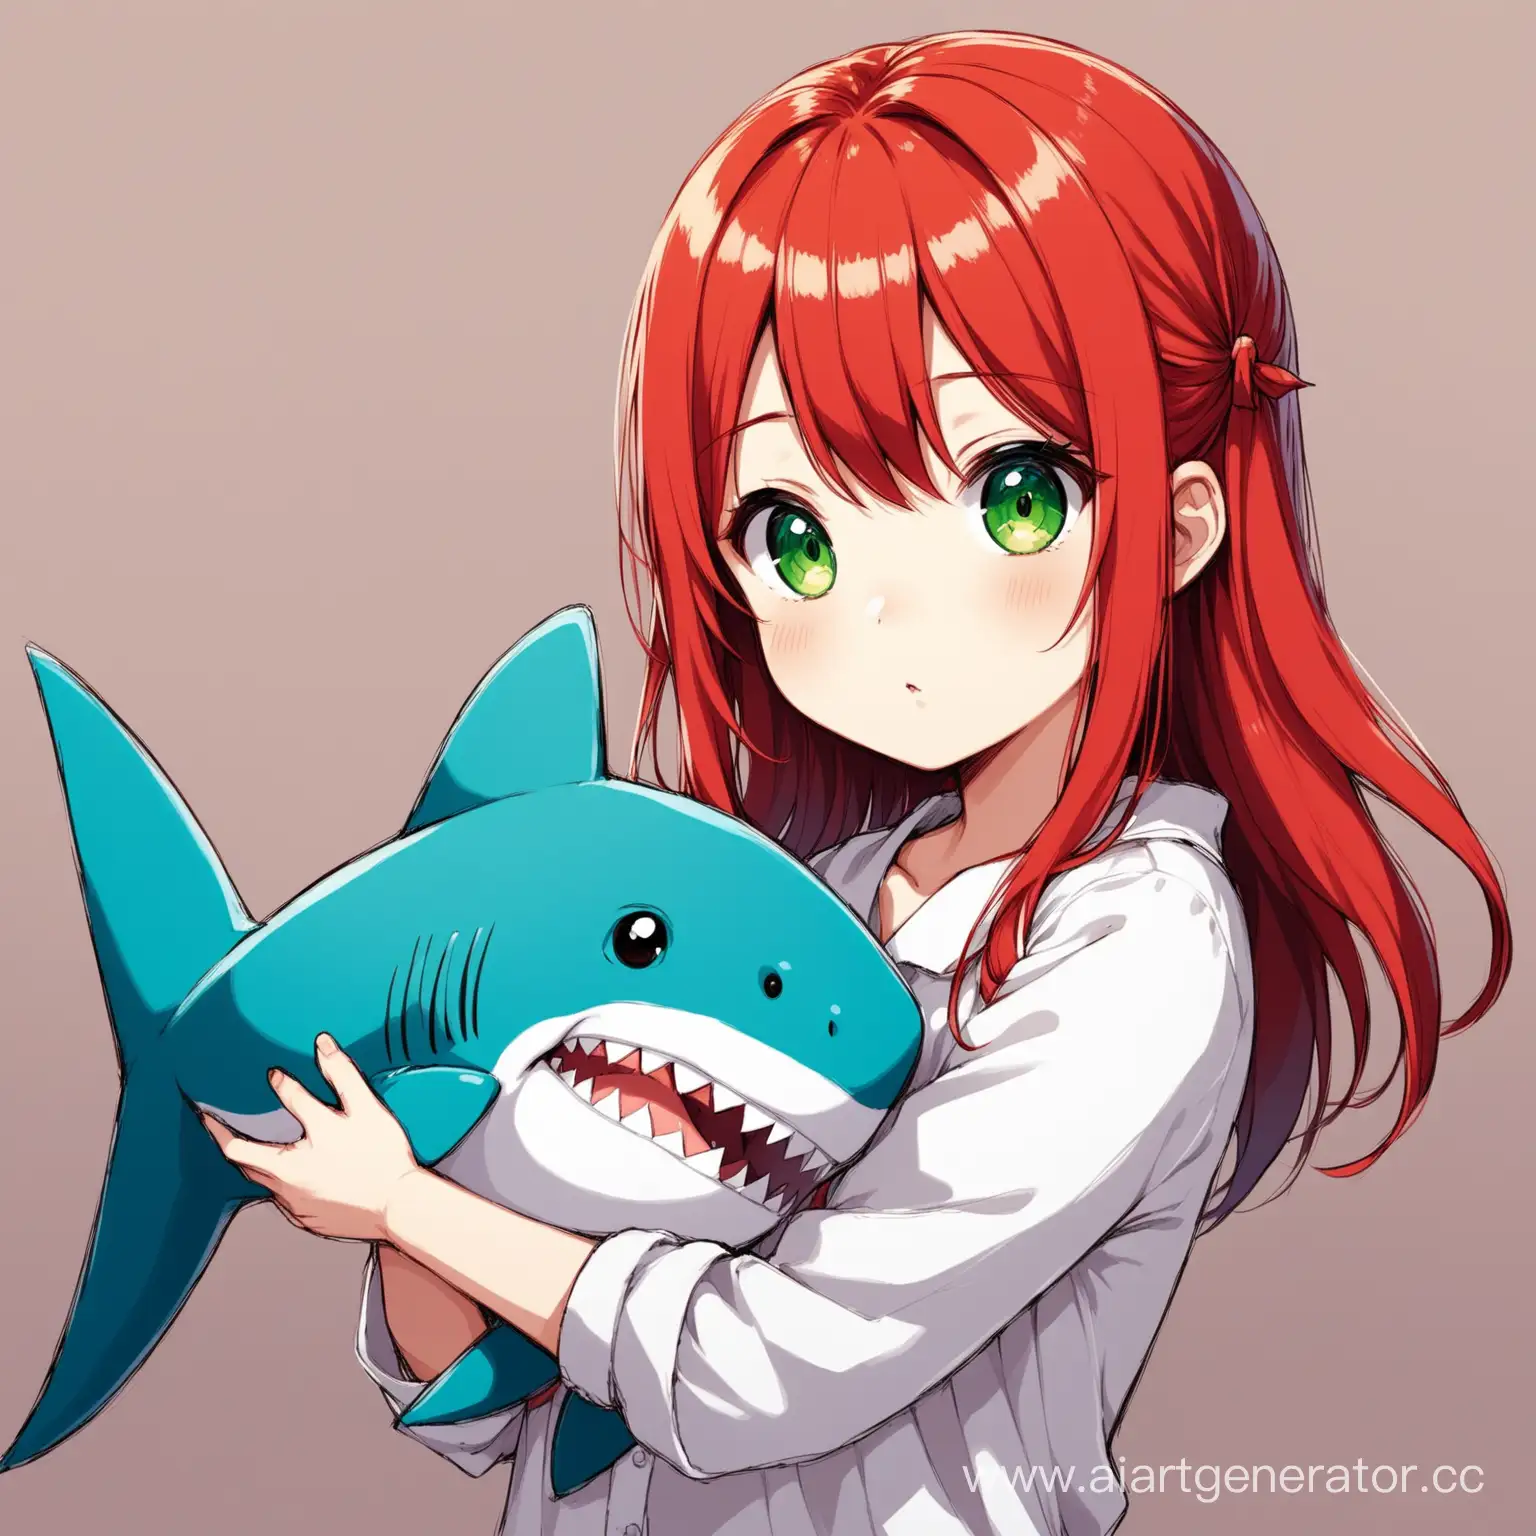 RedHaired-Anime-Girl-with-Green-Eyes-Holding-Soft-Toy-Shark